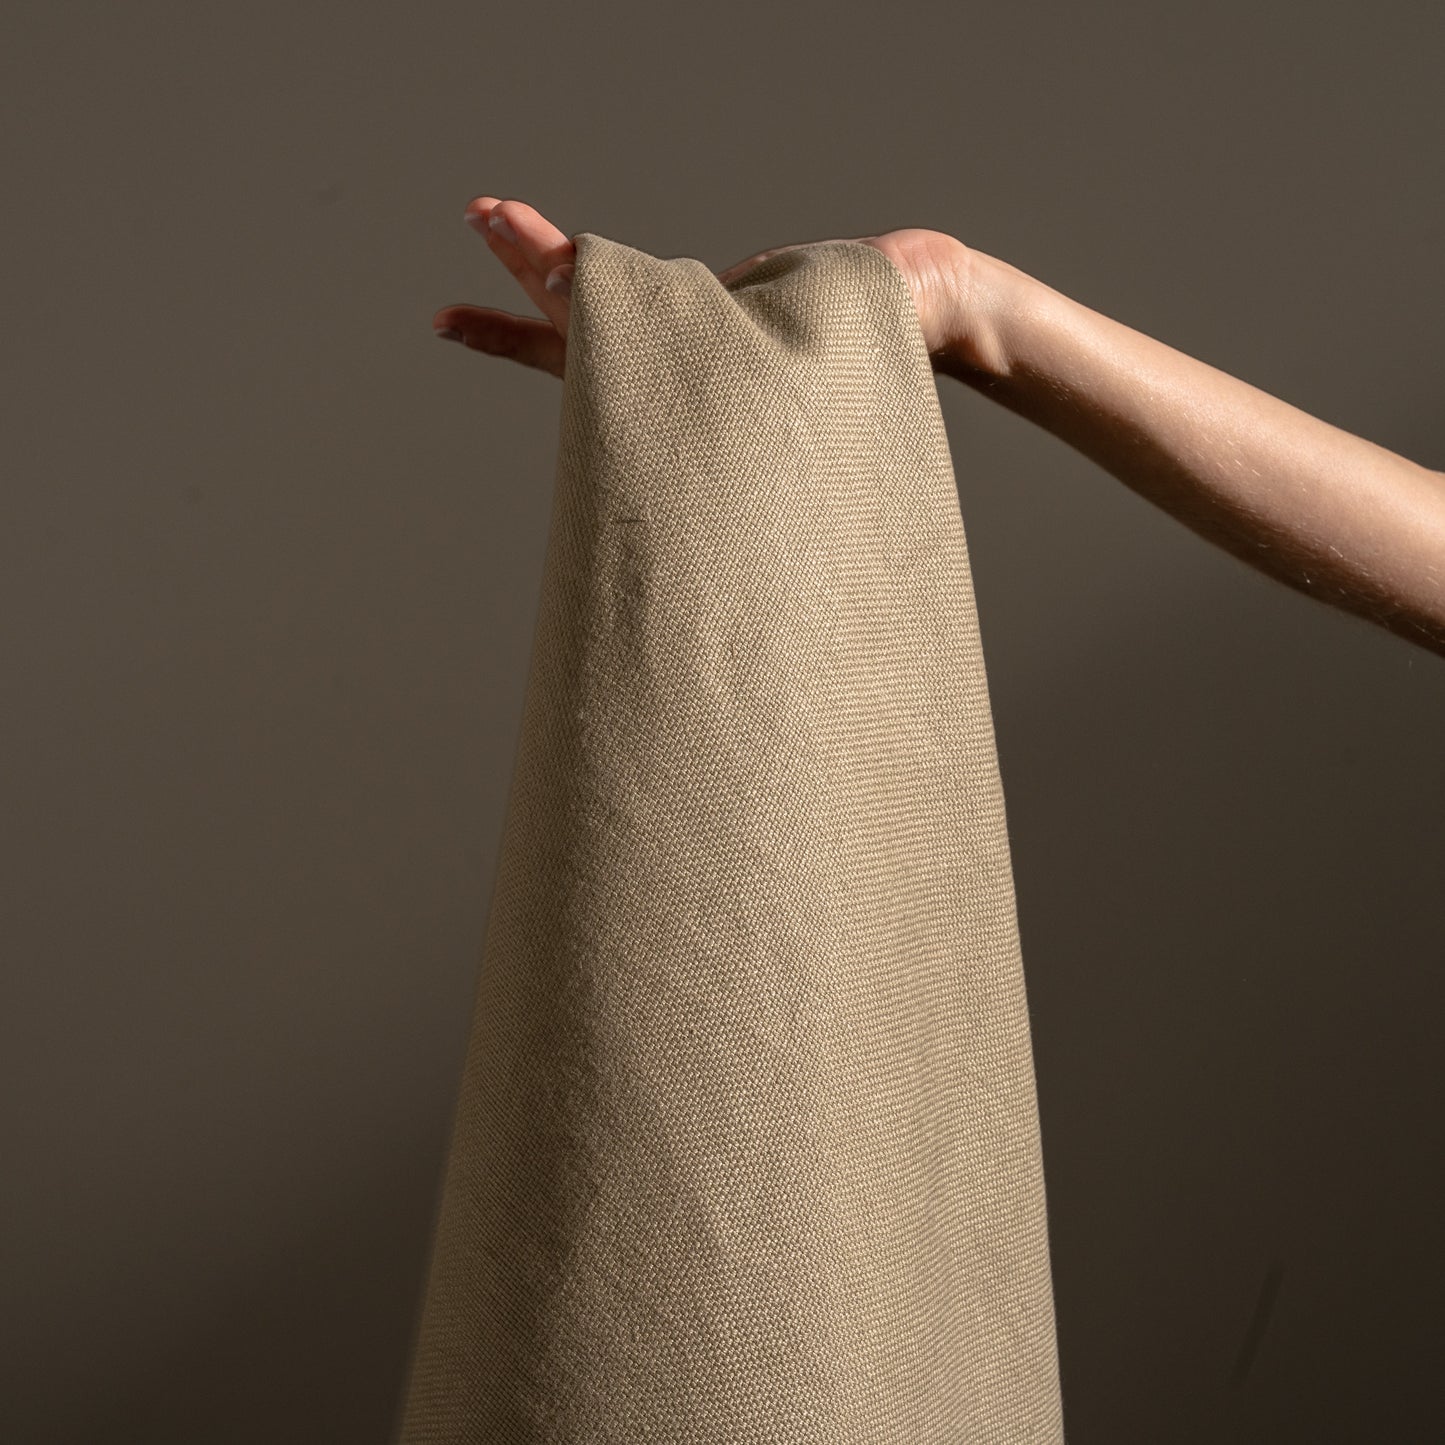 14.5 oz/sq yard 100% Upholstery Weight Linen in Warm Taupe